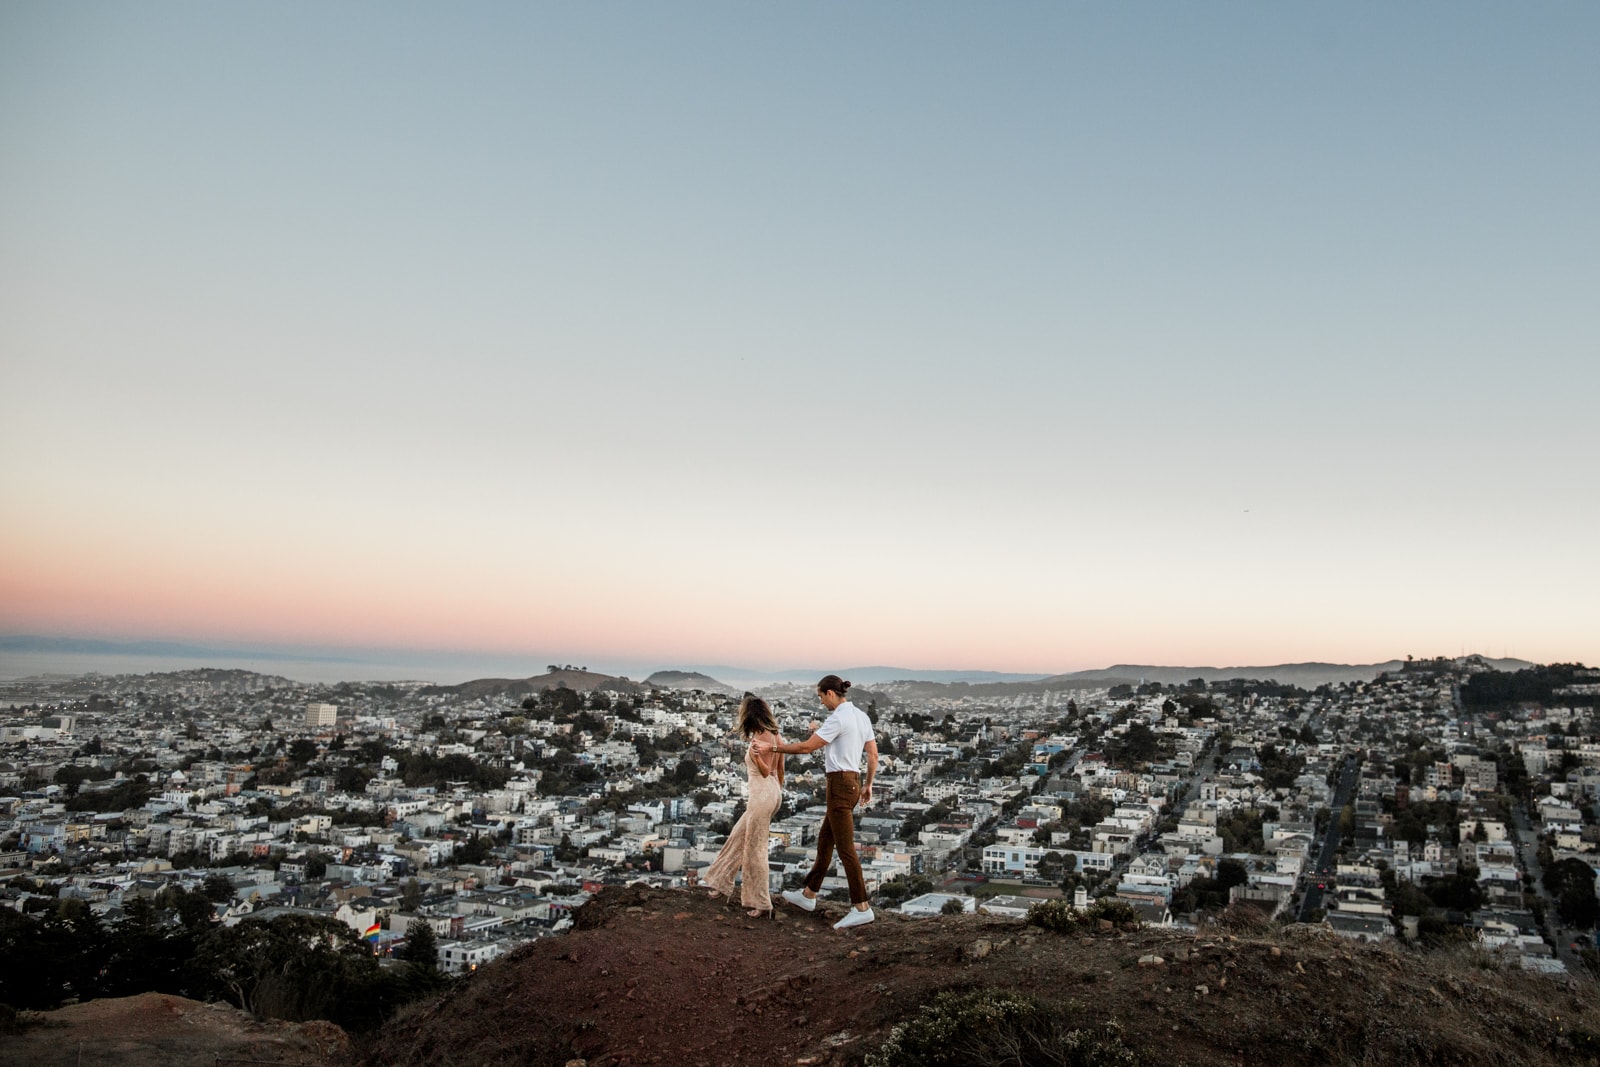 Flora-Grubb-Gardens-Corona-Heights-San-Francisco-Engagement-Session-by-Lilly-Red-Creative